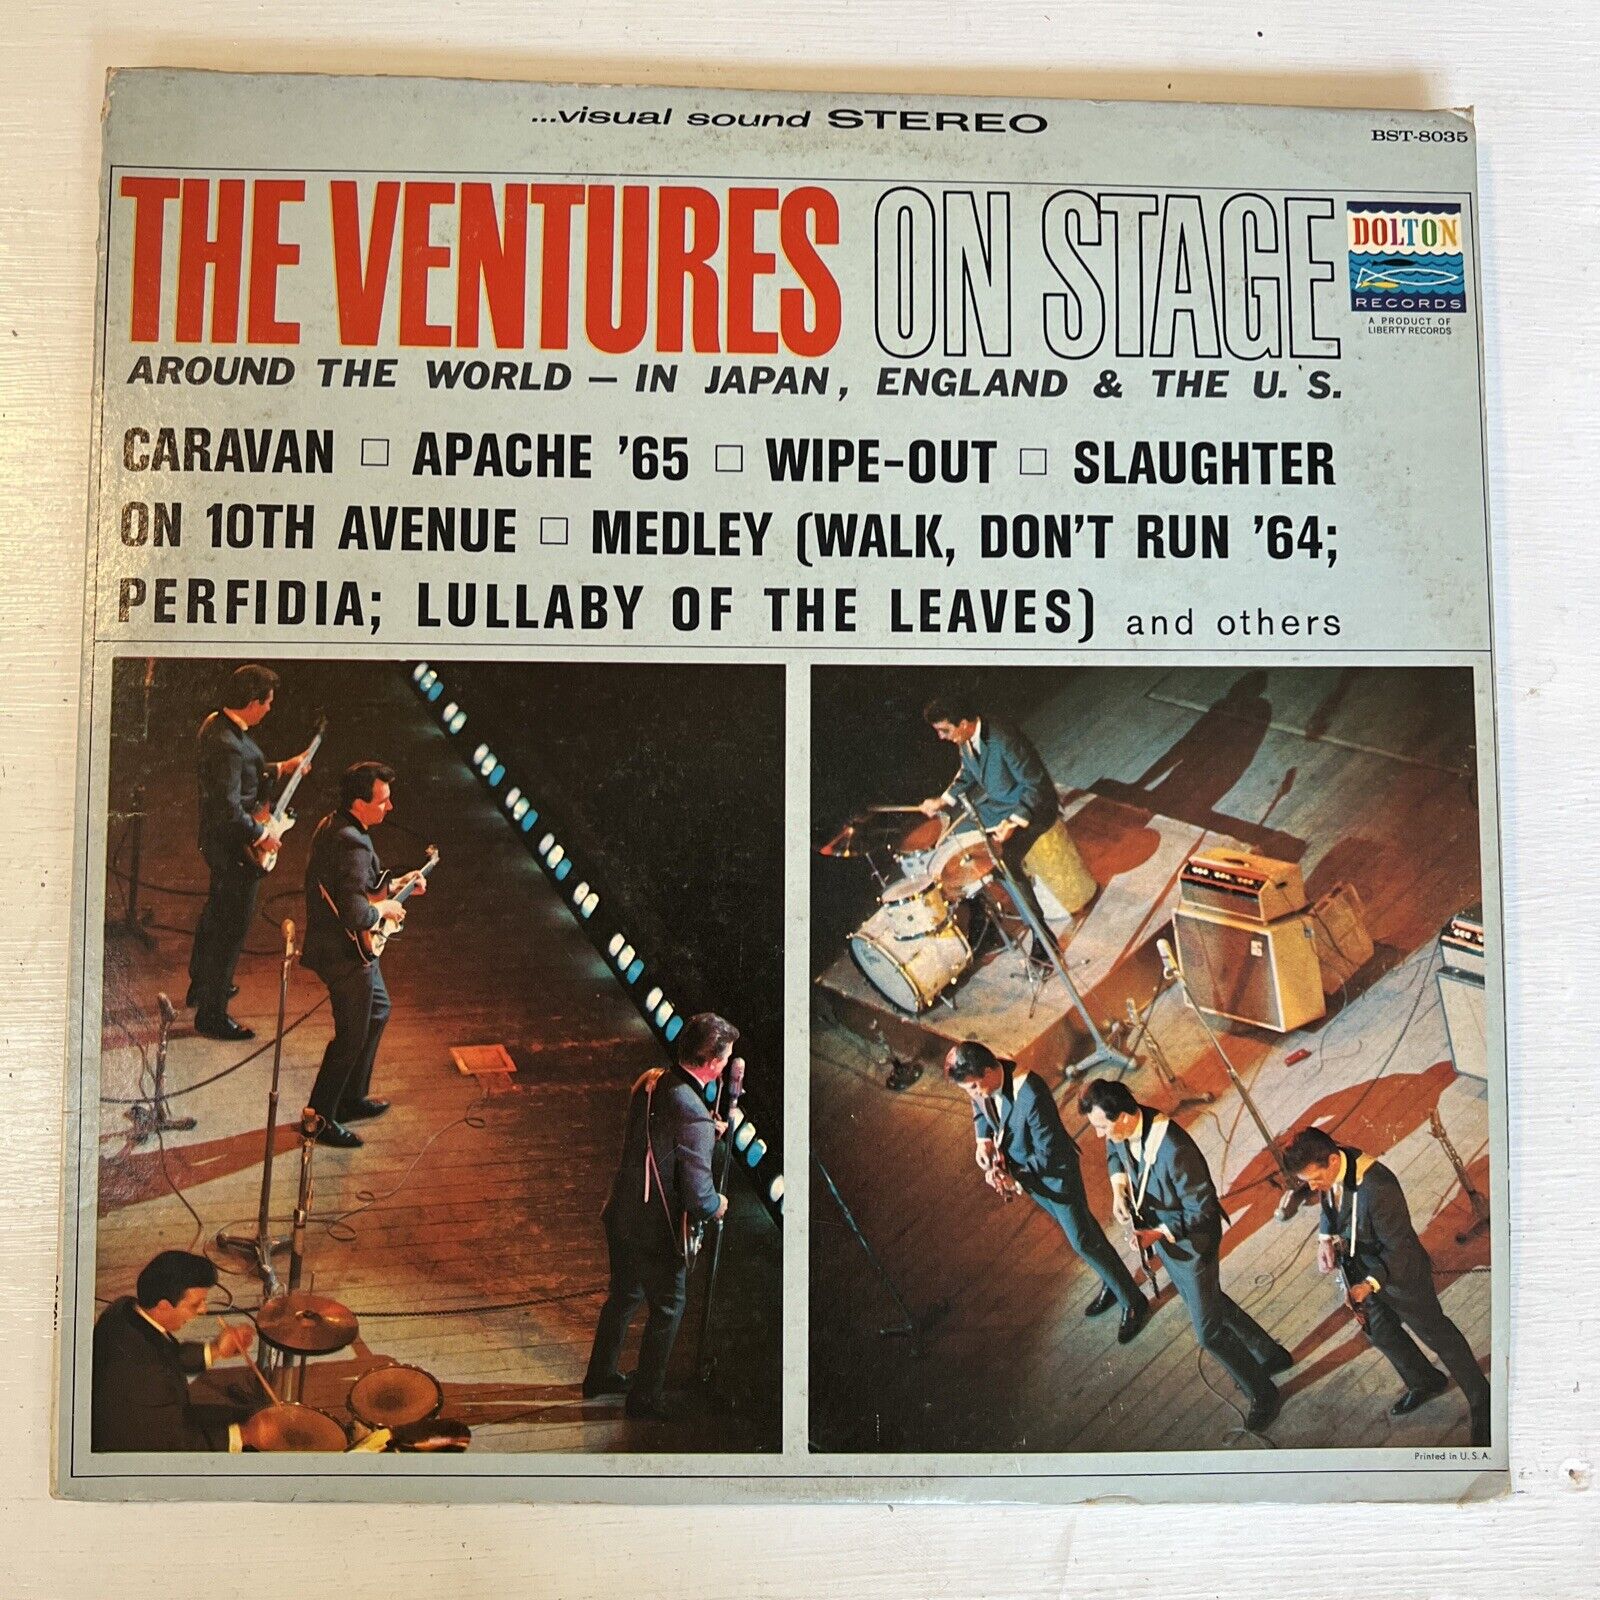 The Ventures On Stage 1965 Dolton BST 8035 VG+/VG+